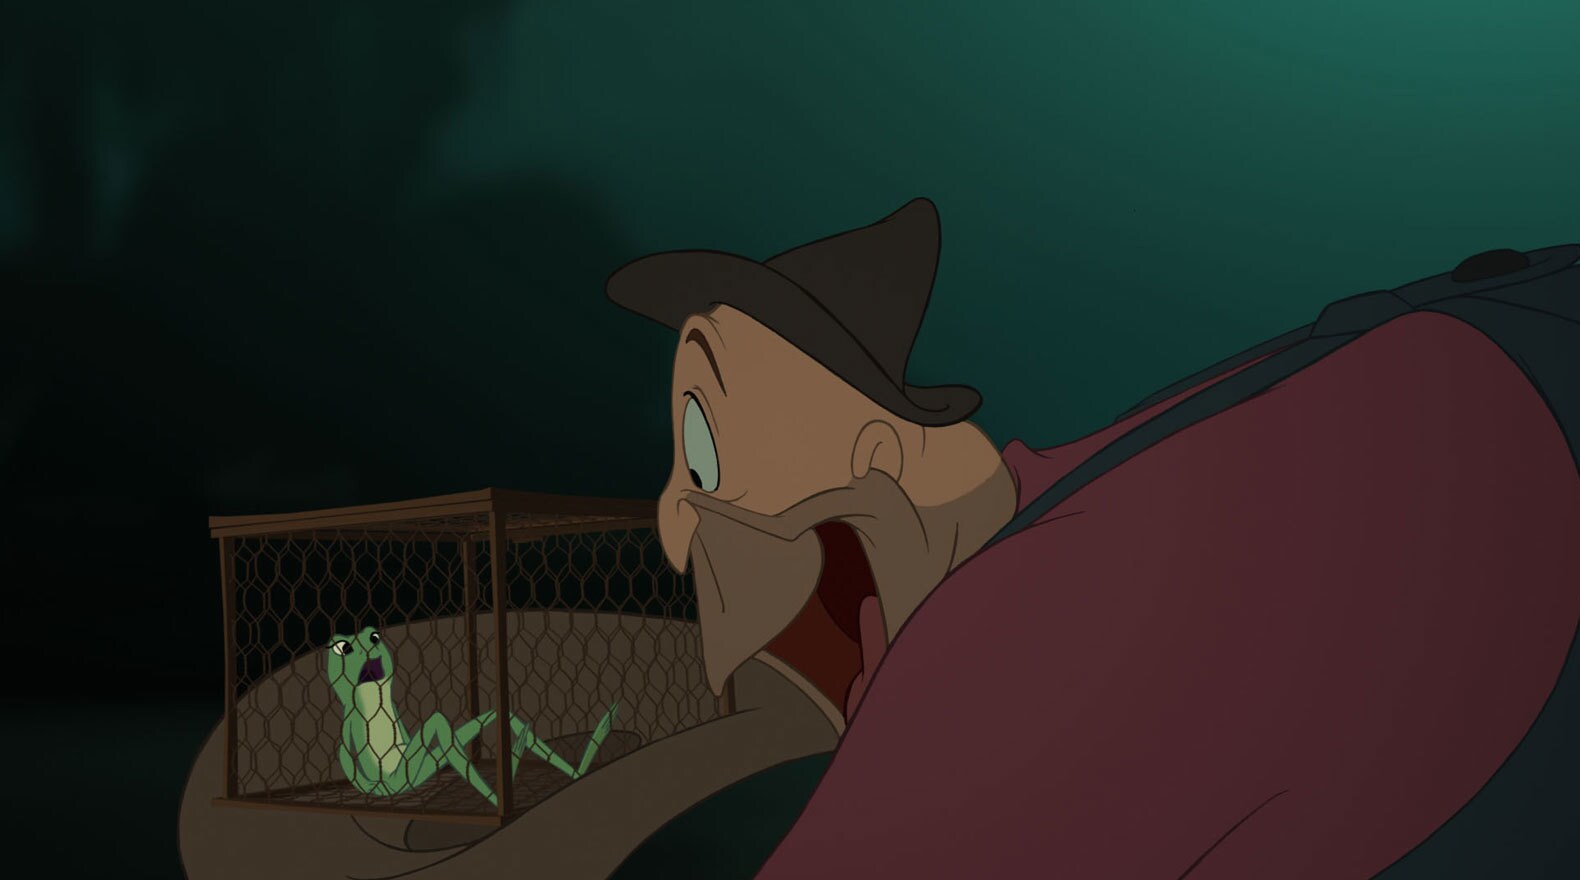 Tiana as a frog voiced by Anika Noni Rose trapped in a cage